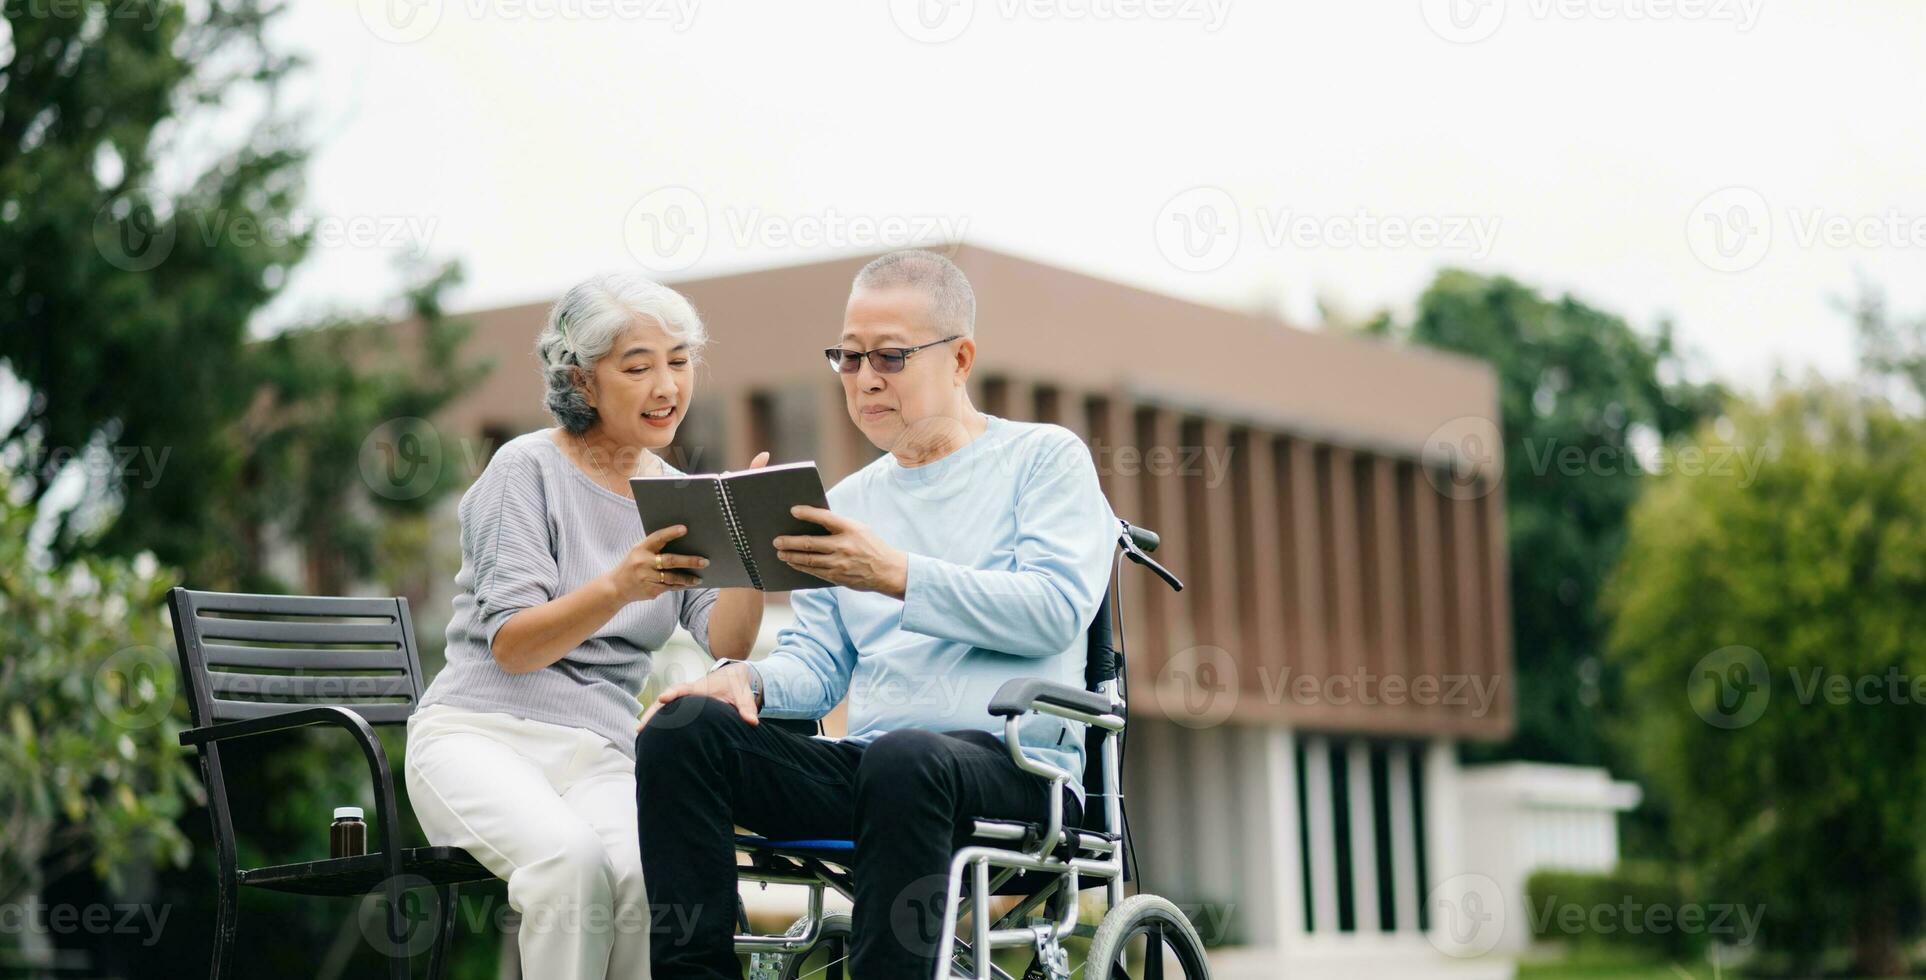 Asian senior couple having a good time. They laughing and smiling while sitting outdoor at the park. Lovely senior couple photo